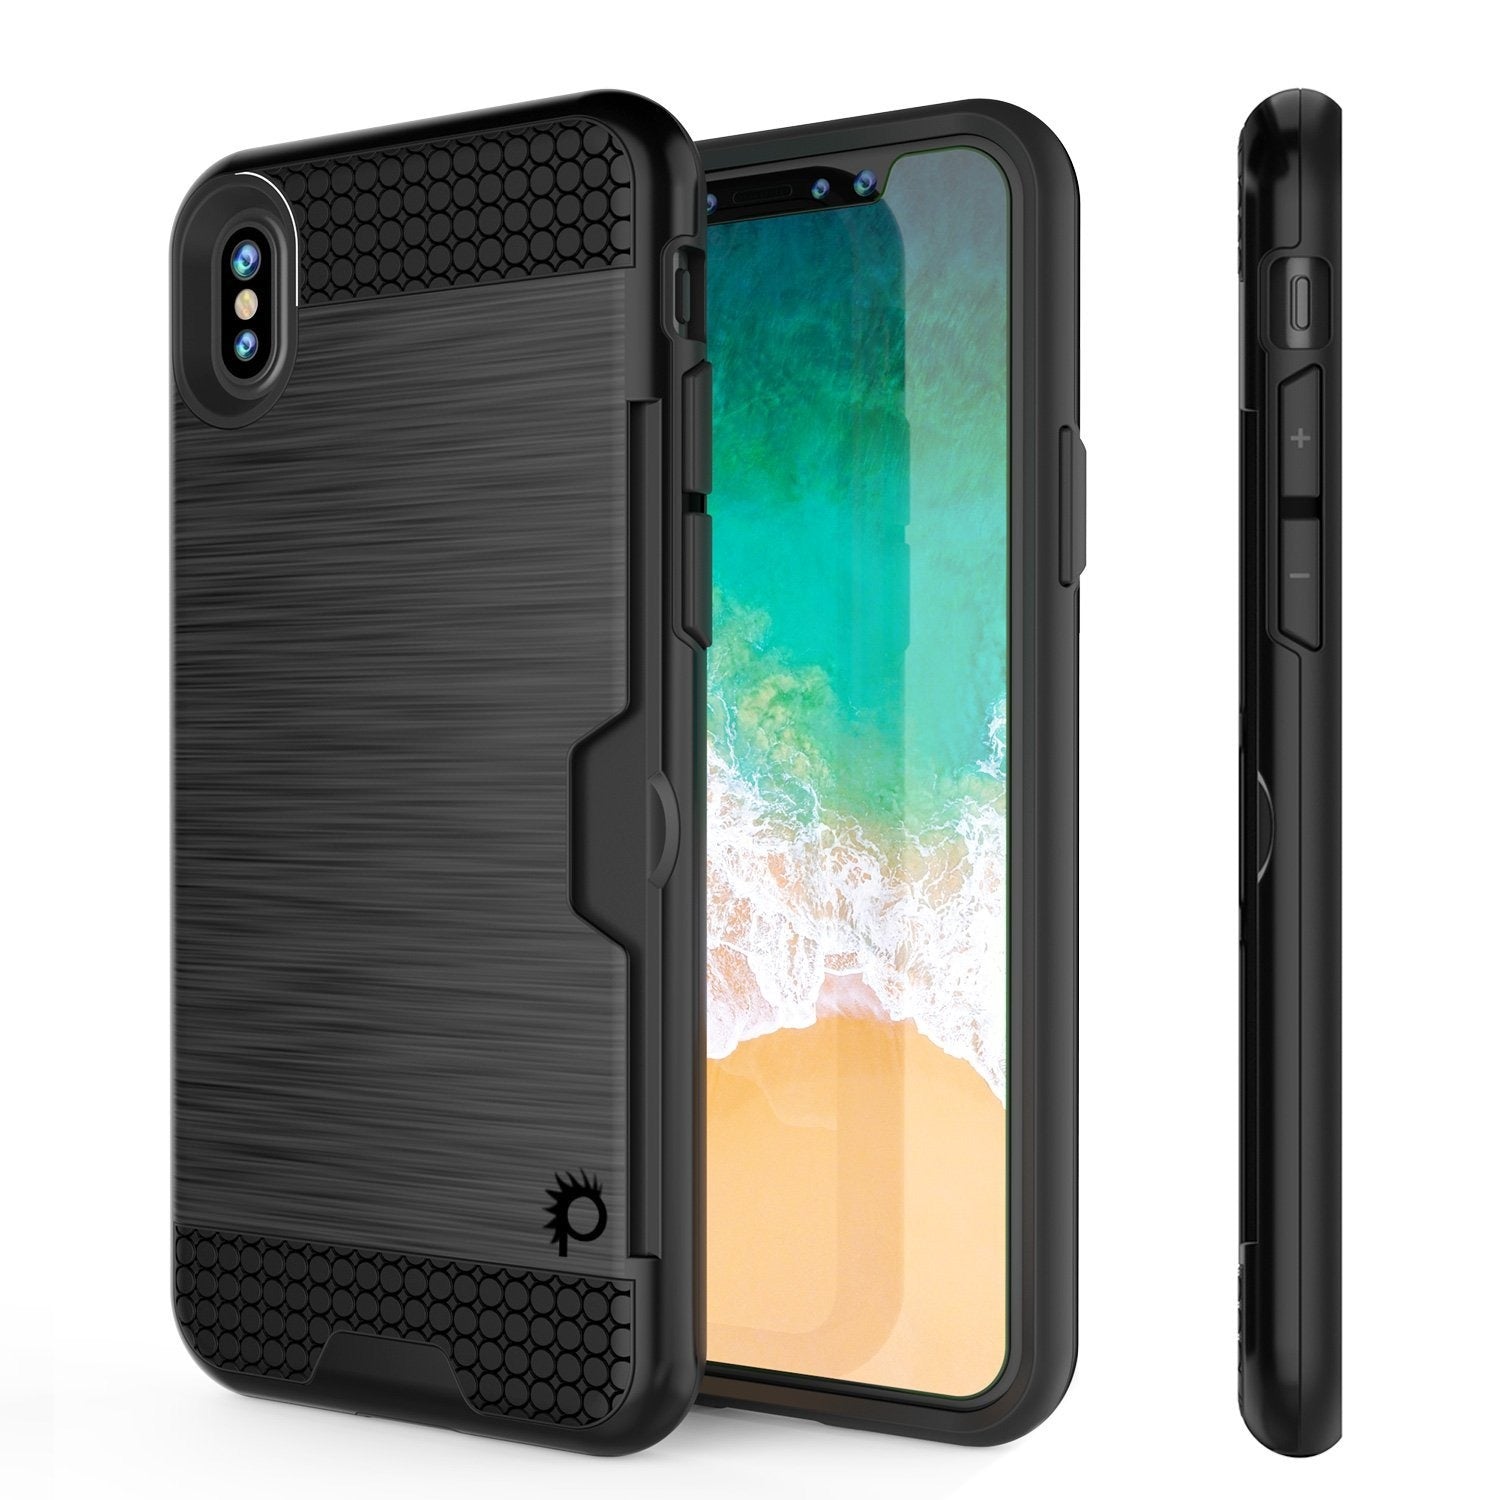 iPhone X Case, PUNKcase [SLOT Series] Slim Fit Dual-Layer Armor Cover & Tempered Glass PUNKSHIELD Screen Protector for Apple iPhone X [Black]